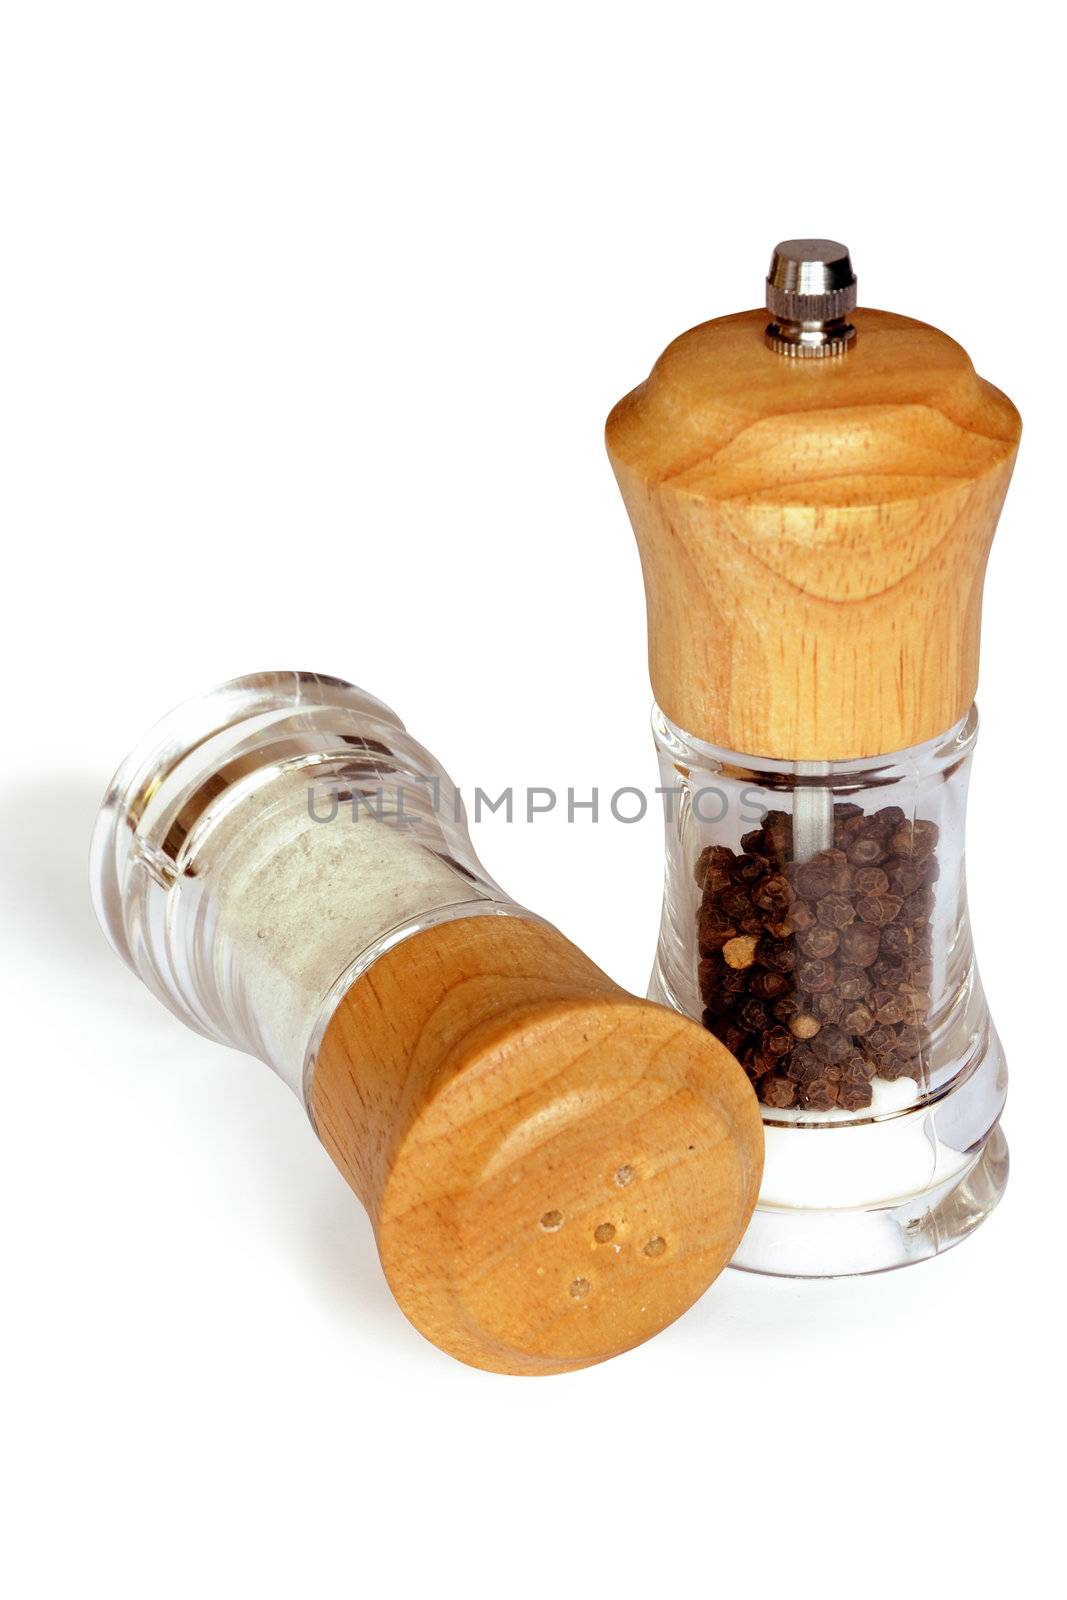 An image of two bottles of salt and pepper